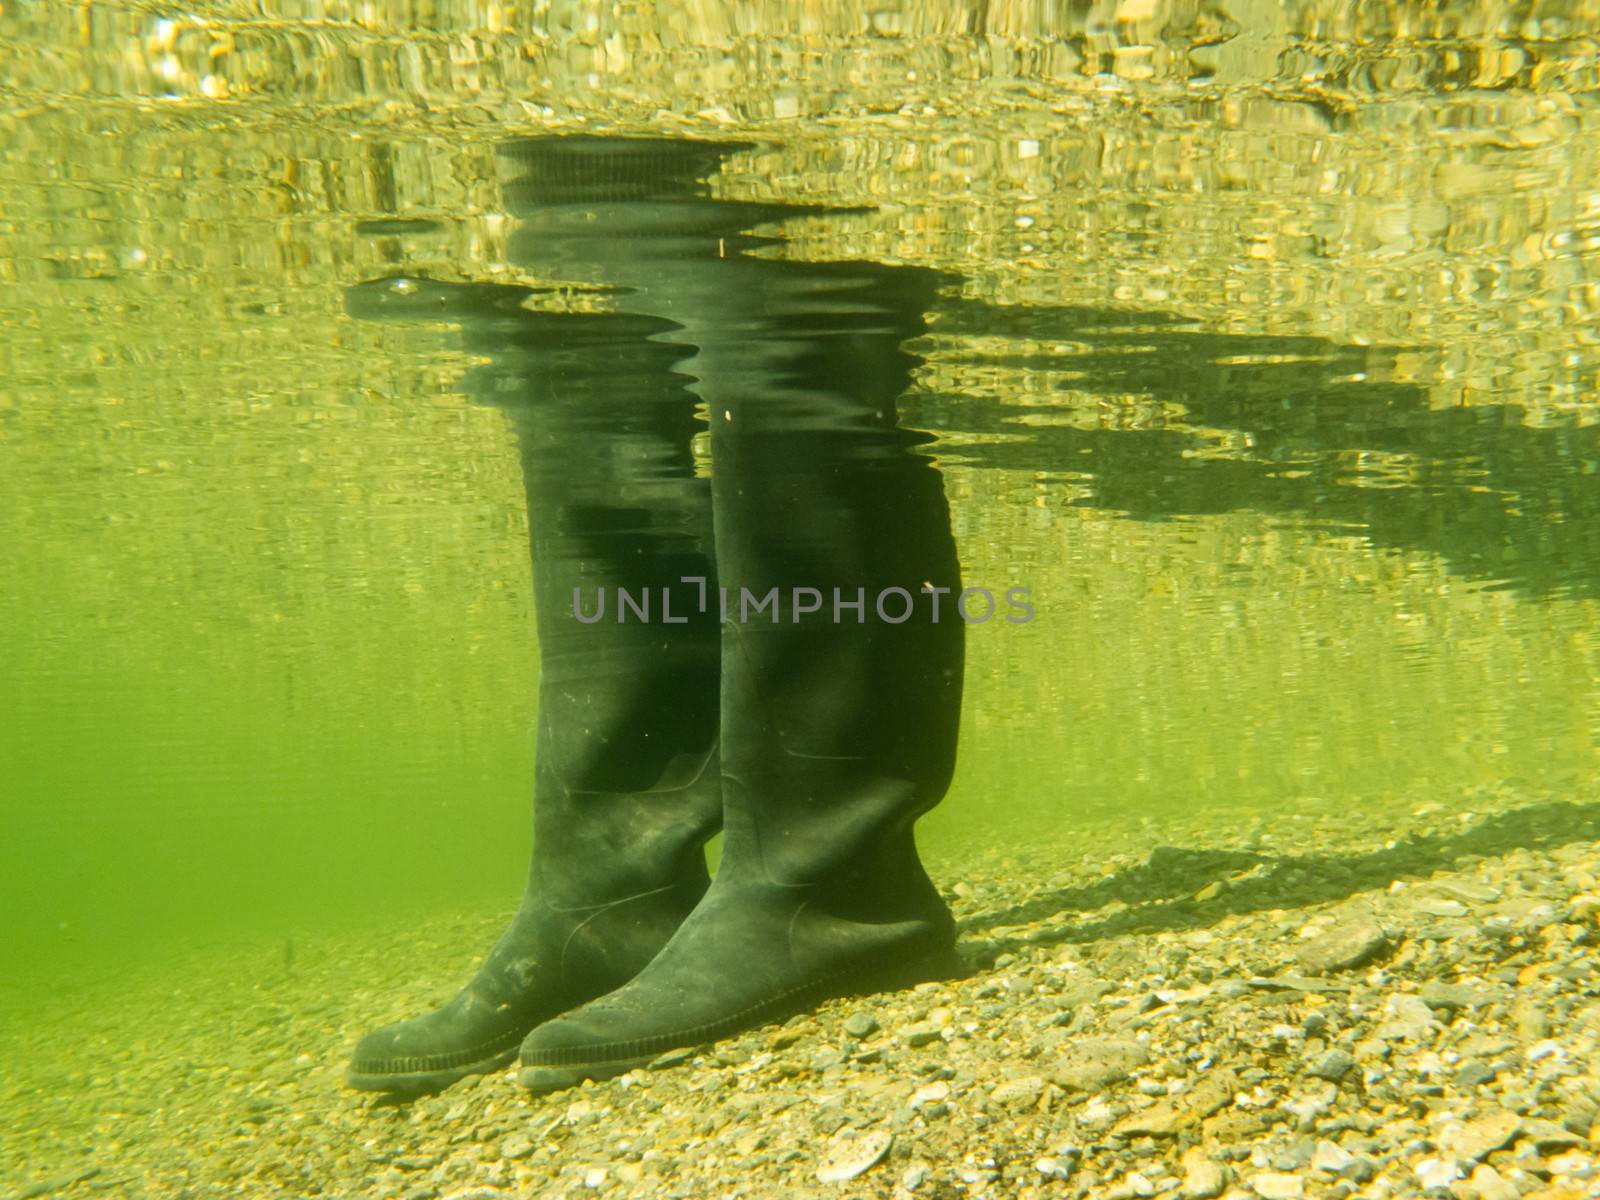 Closeup underwater view of rubber boots gumboots or waders of a person walking in shallow water of gravel and sand beach